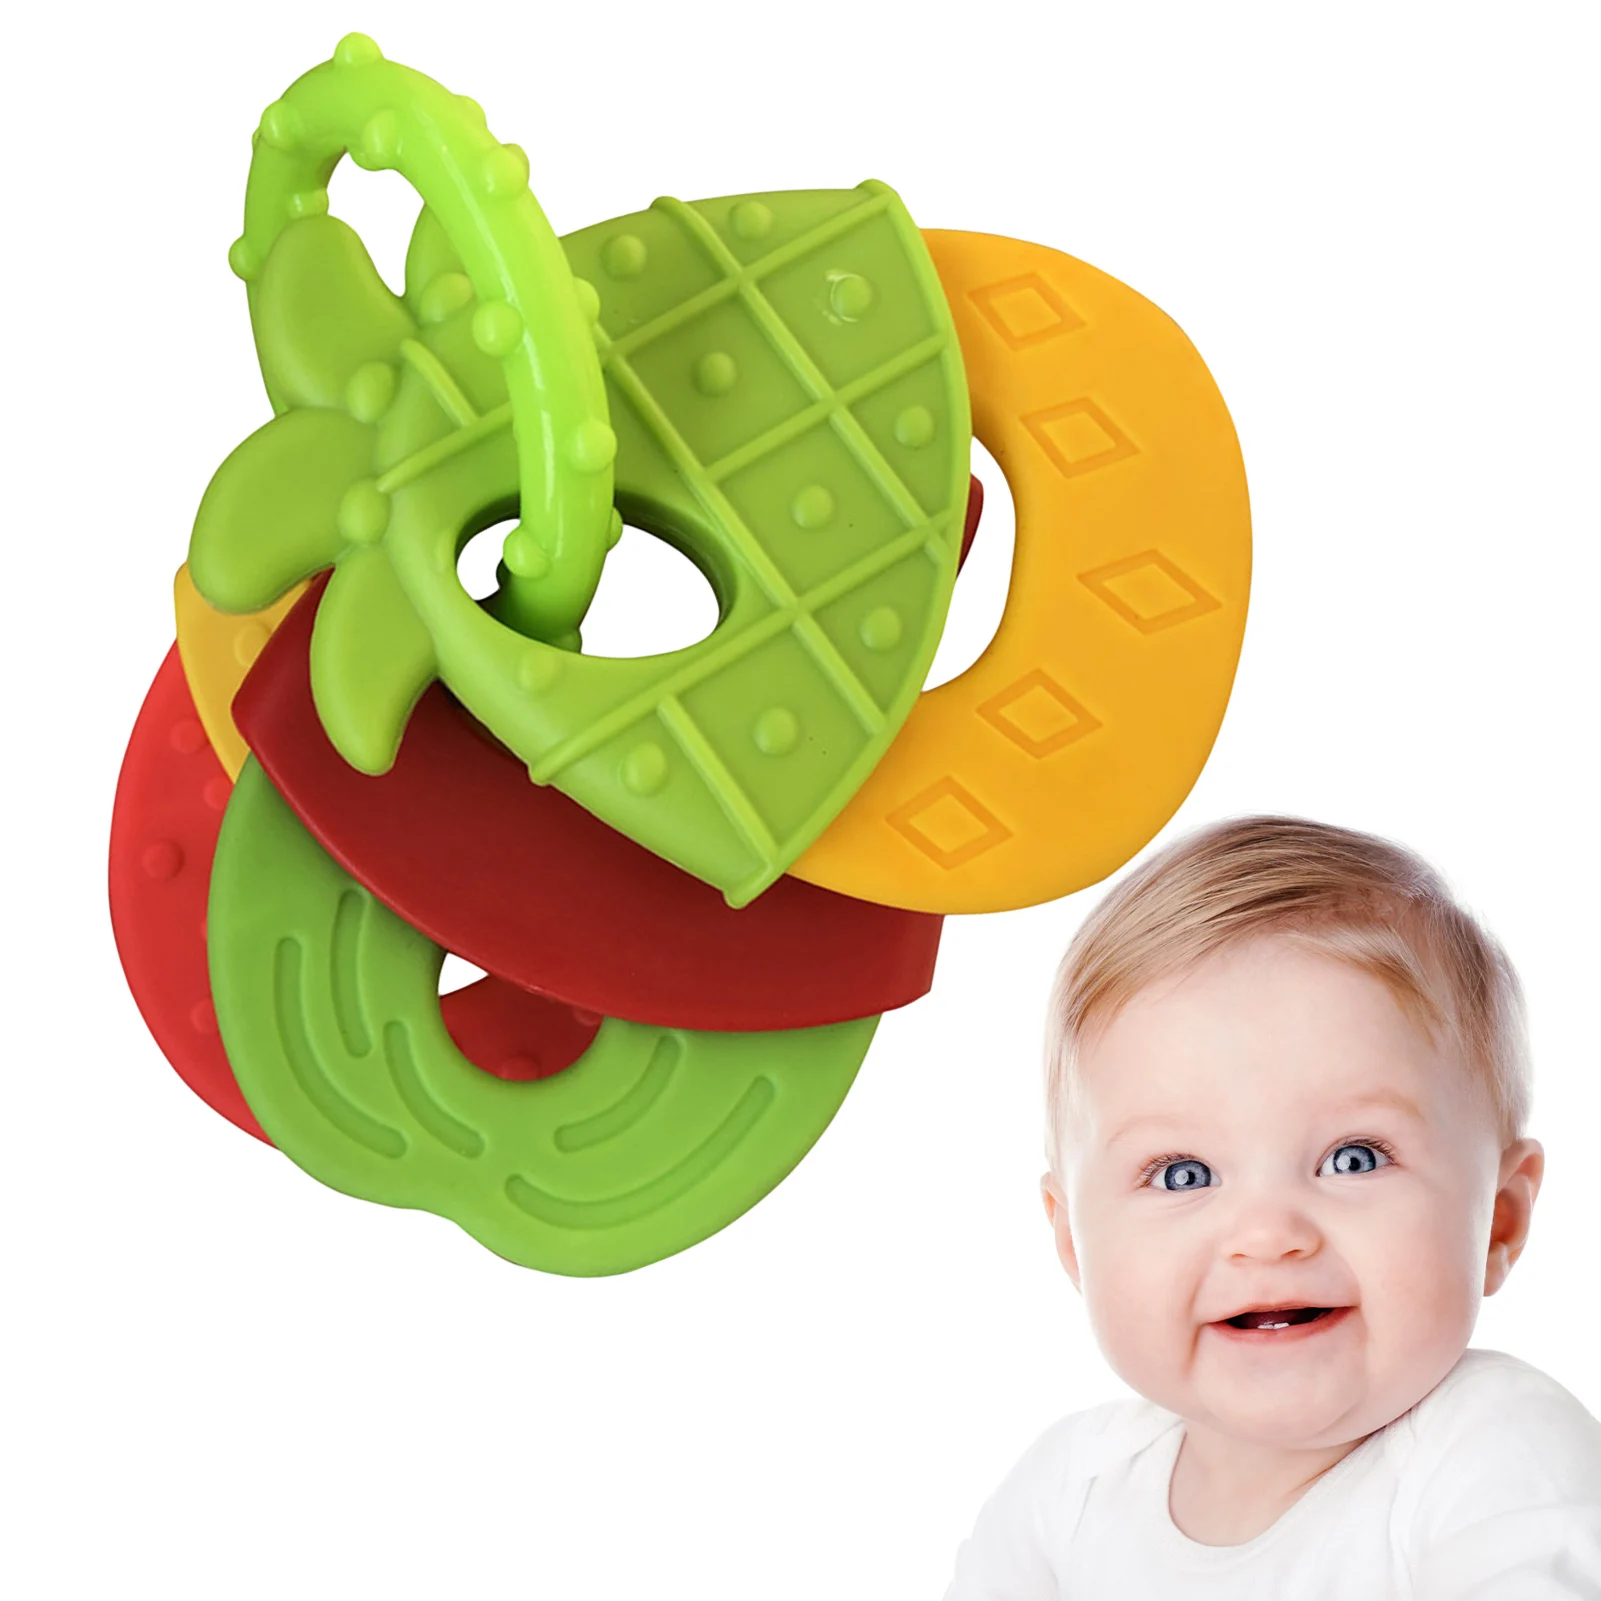 

Baby Teething Toys Soft Silicone Teethers For Toddlers Soft Silicone Fruit Shape Teether Toys For Babies 3-24 Months Toddlers